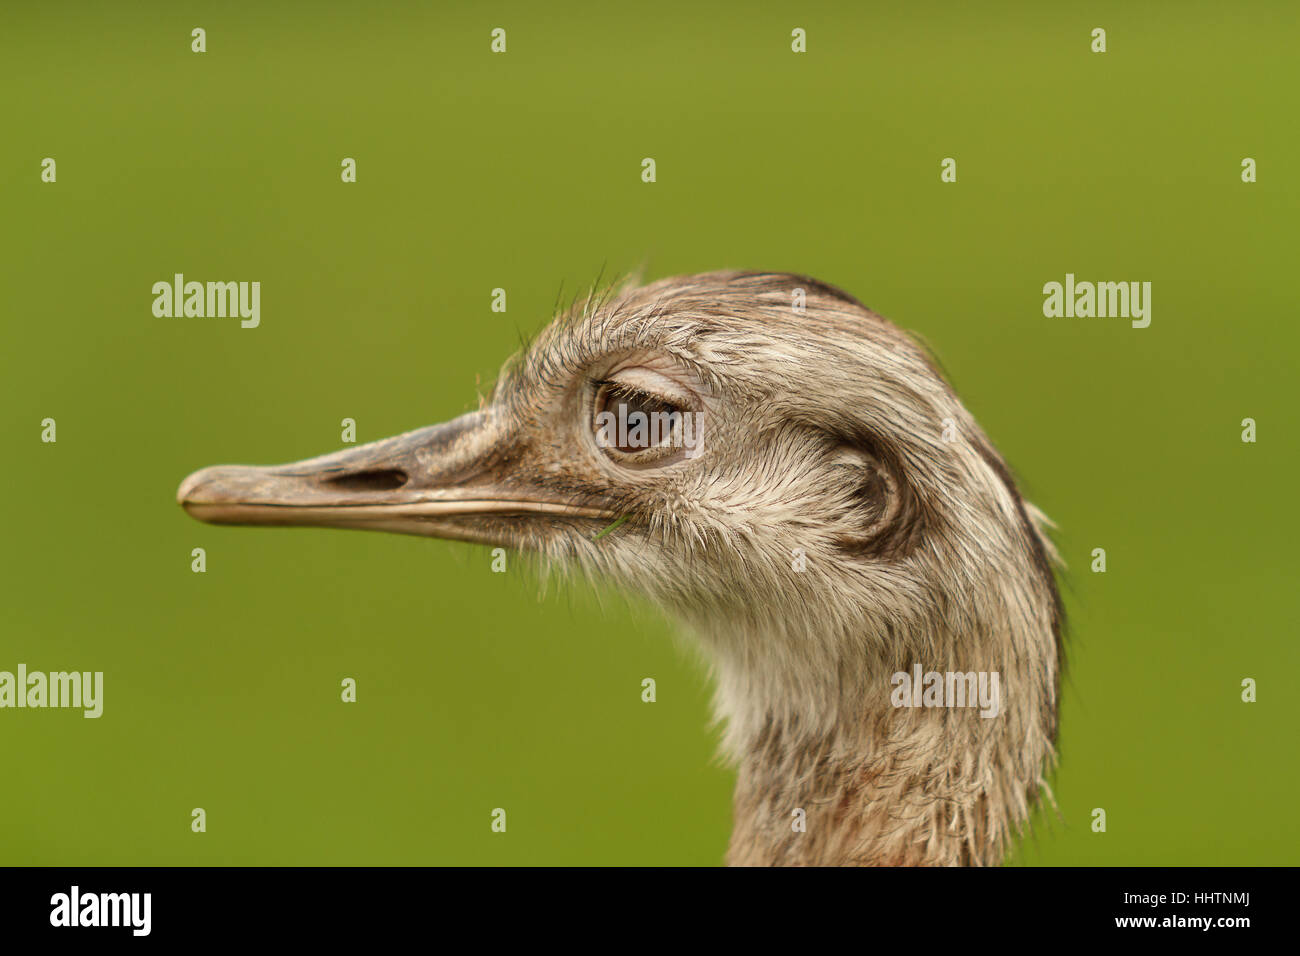 Greater Rhea latin name Rhea americana a large flightless bird from South America similar to the Emu or Ostrich female side head profile against a def Stock Photo